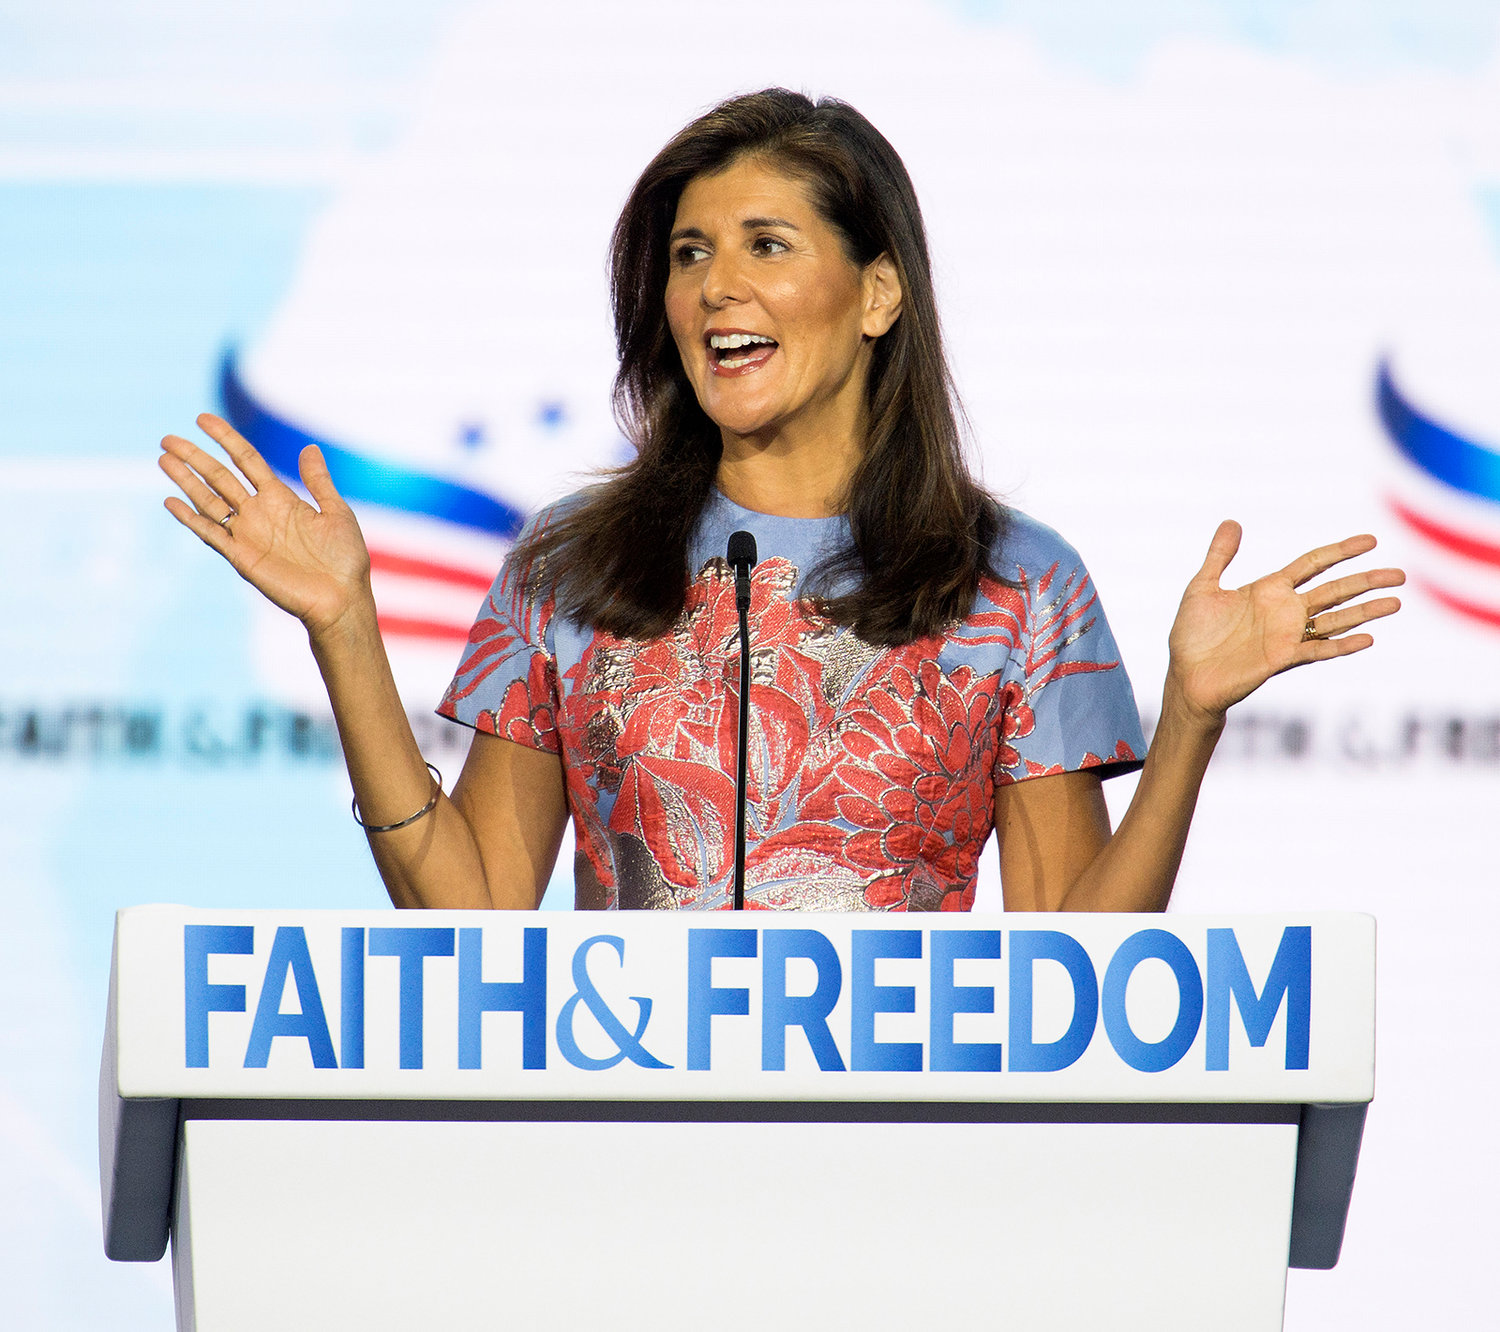 Nikki Haley gives a keynote address at the Faith & Freedom Coalition's Road to Majority Policy Conference at the Gaylord Opryland Resort & Convention Center in Nashville, Tennessee on June 16, 2022. (Brian Cahn/ZUMA Press Wire/TNS)